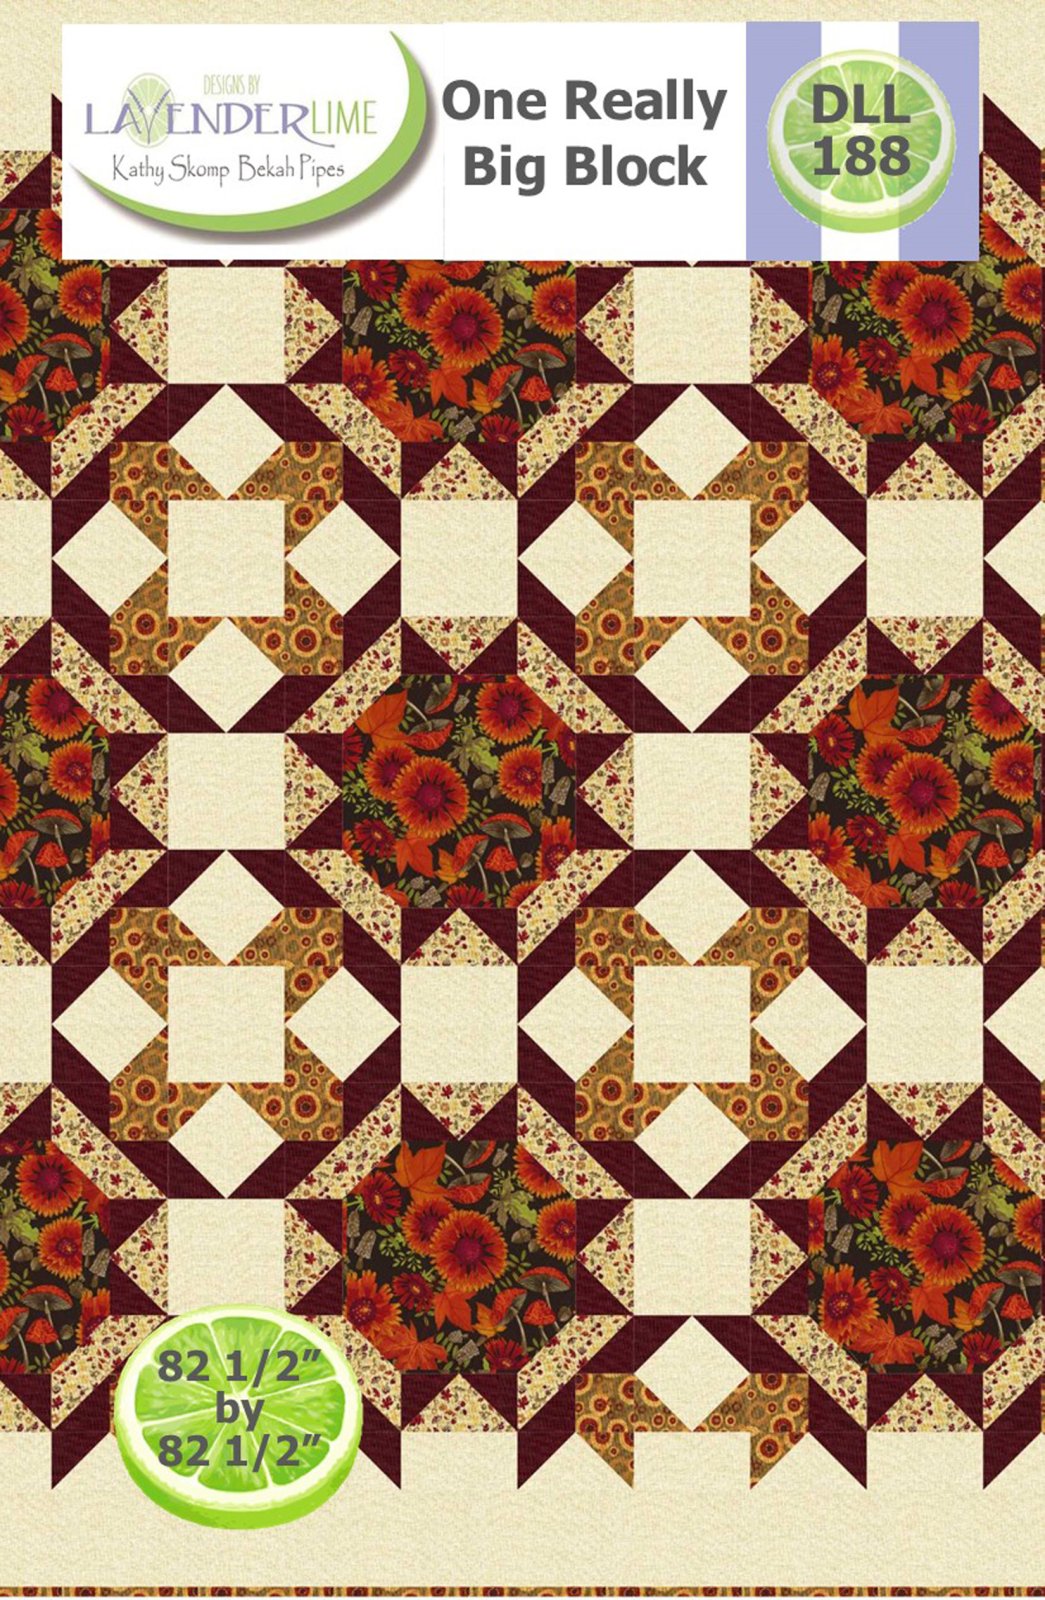 One Really Big Block Downloadable Pattern by Lavender Lime Quilting